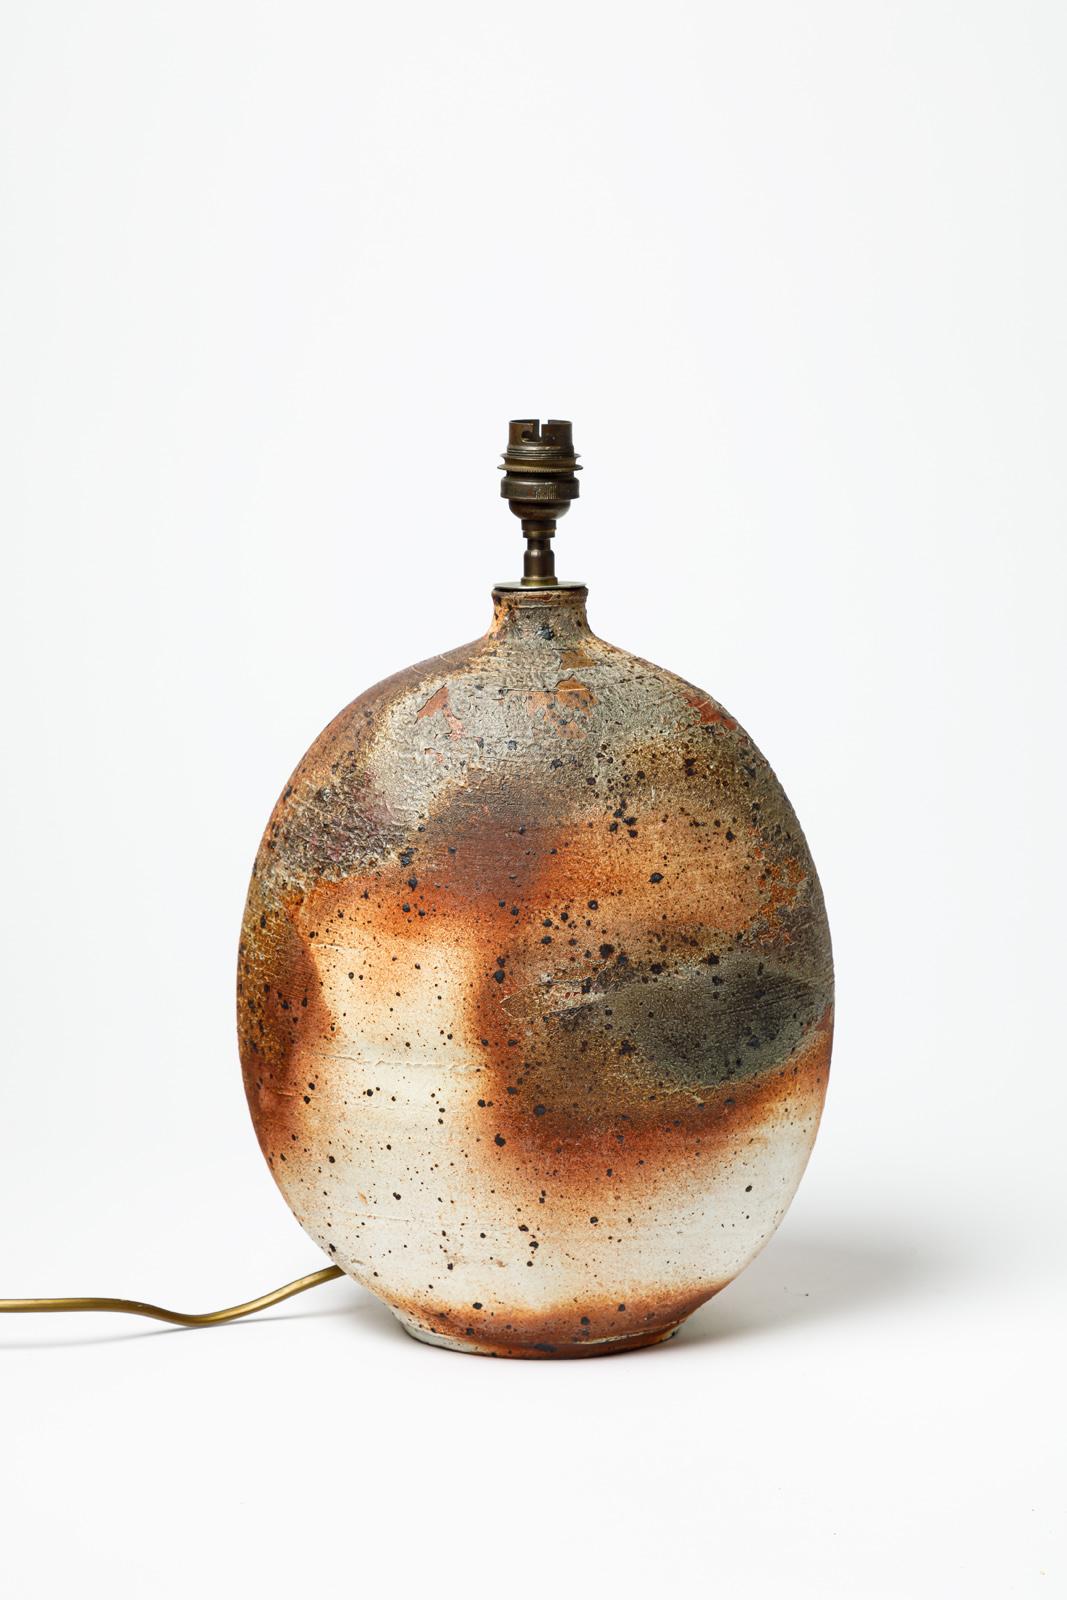 Wood fired stoneware table lamp by Bruno H’rdy.
Artist signature under the base. Circa 1960-1970.
H : 11.8’ x 8.7’ x 4.7’ inches (ceramic only).
Sold with a European electrical system.